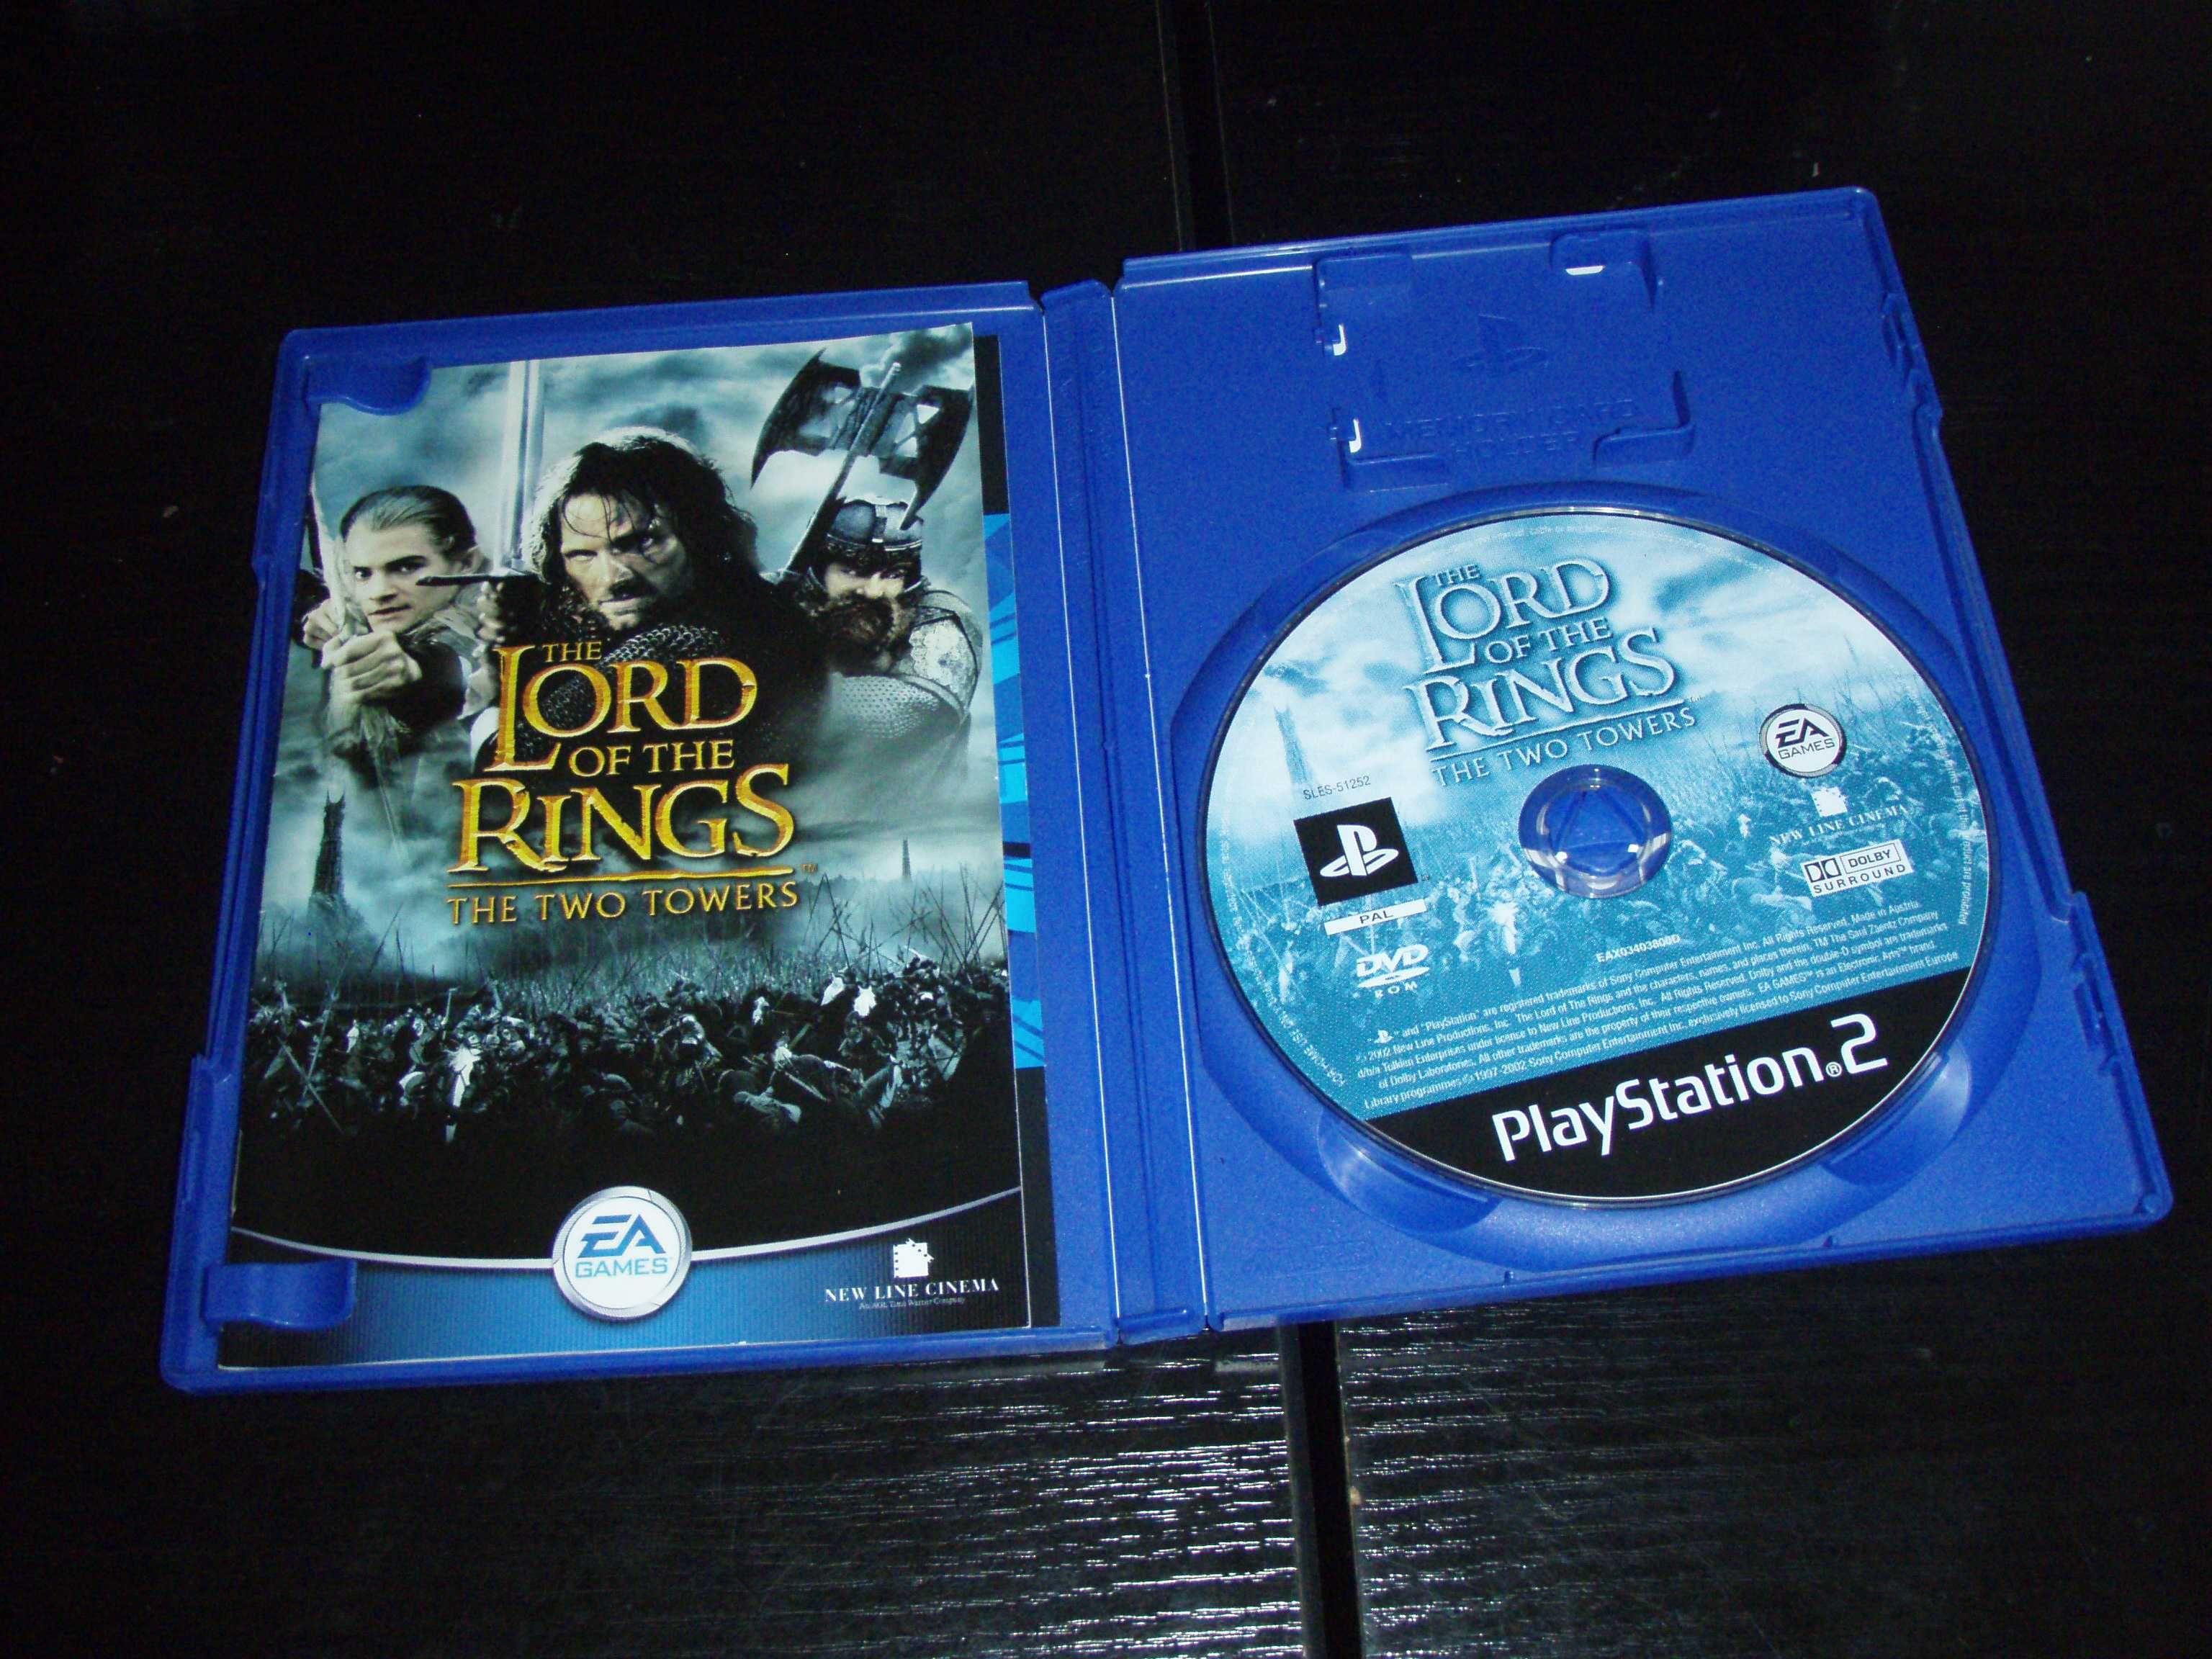 The Lord of the Rings - The Two Towers PS2